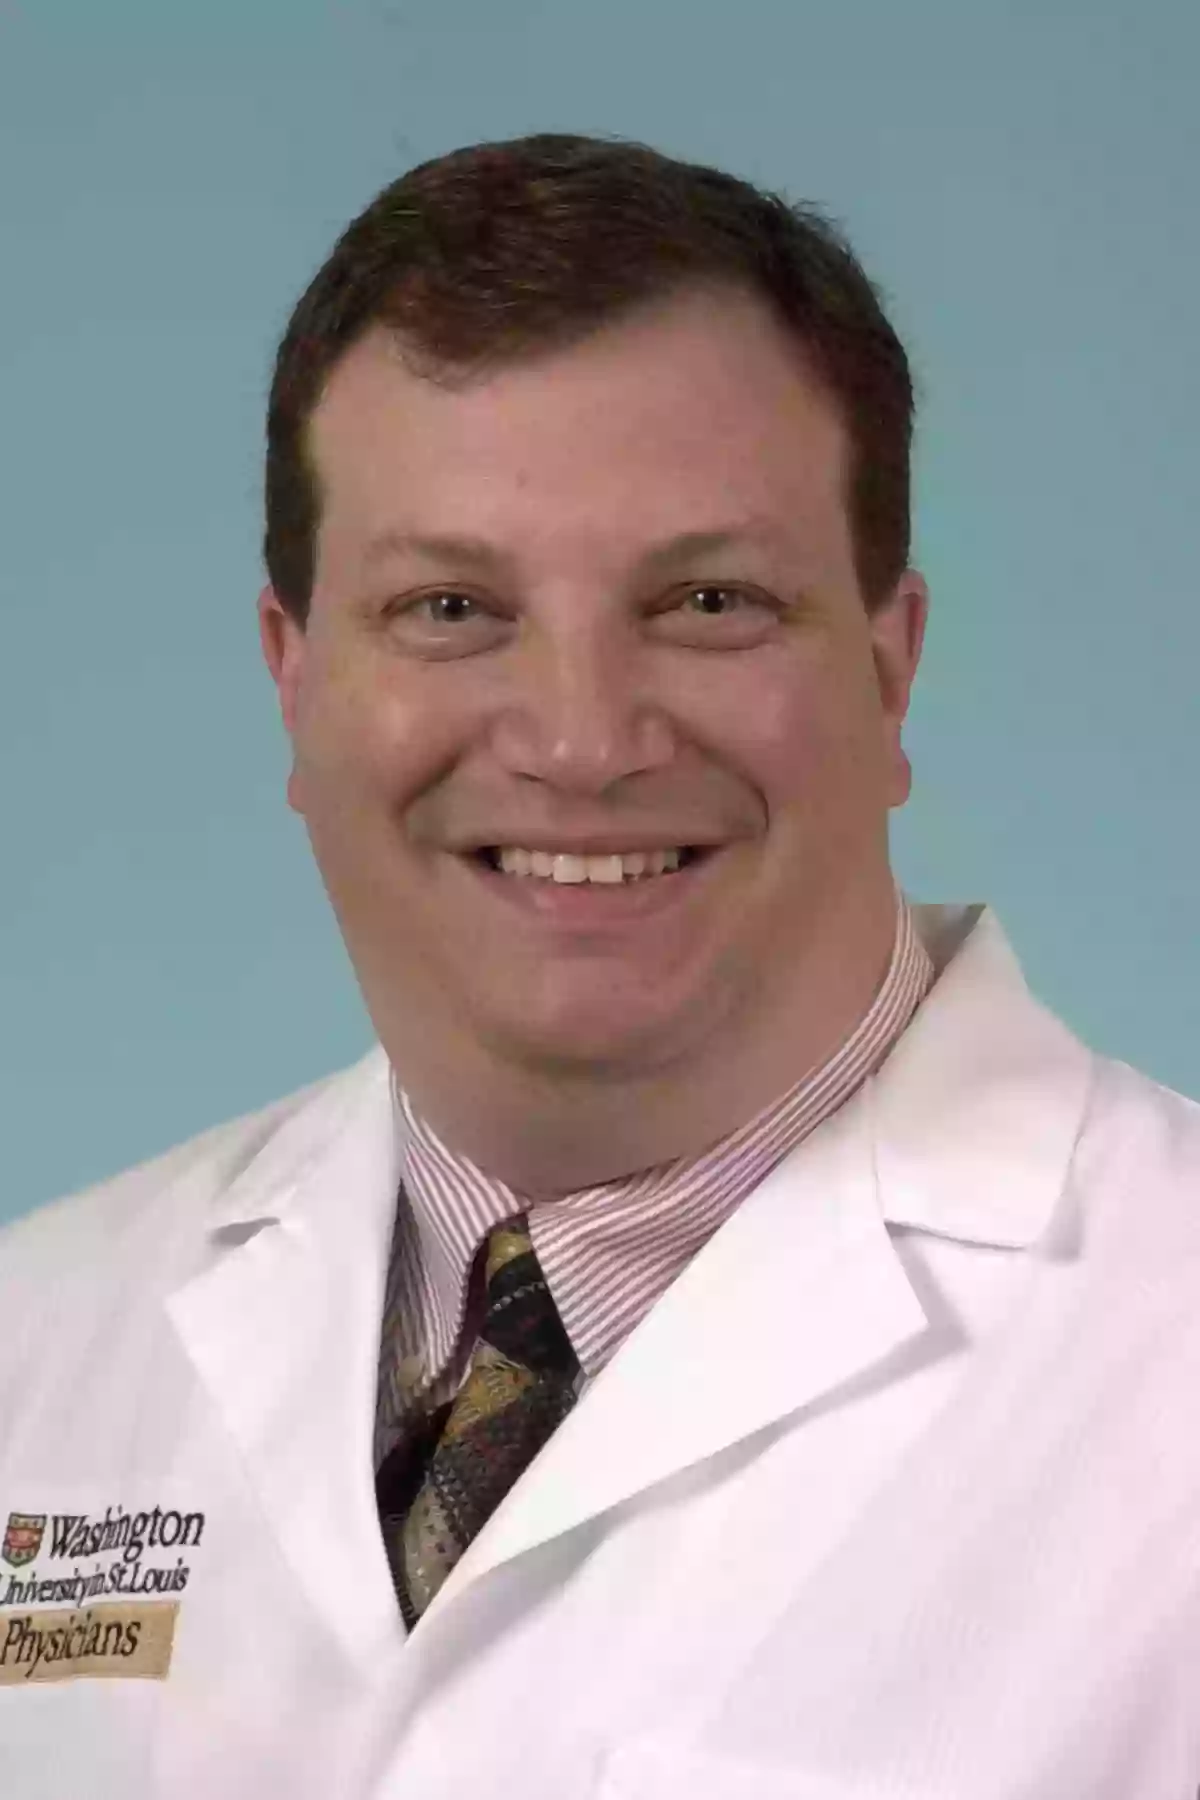 Keith E. Stockerl-Goldstein, MD